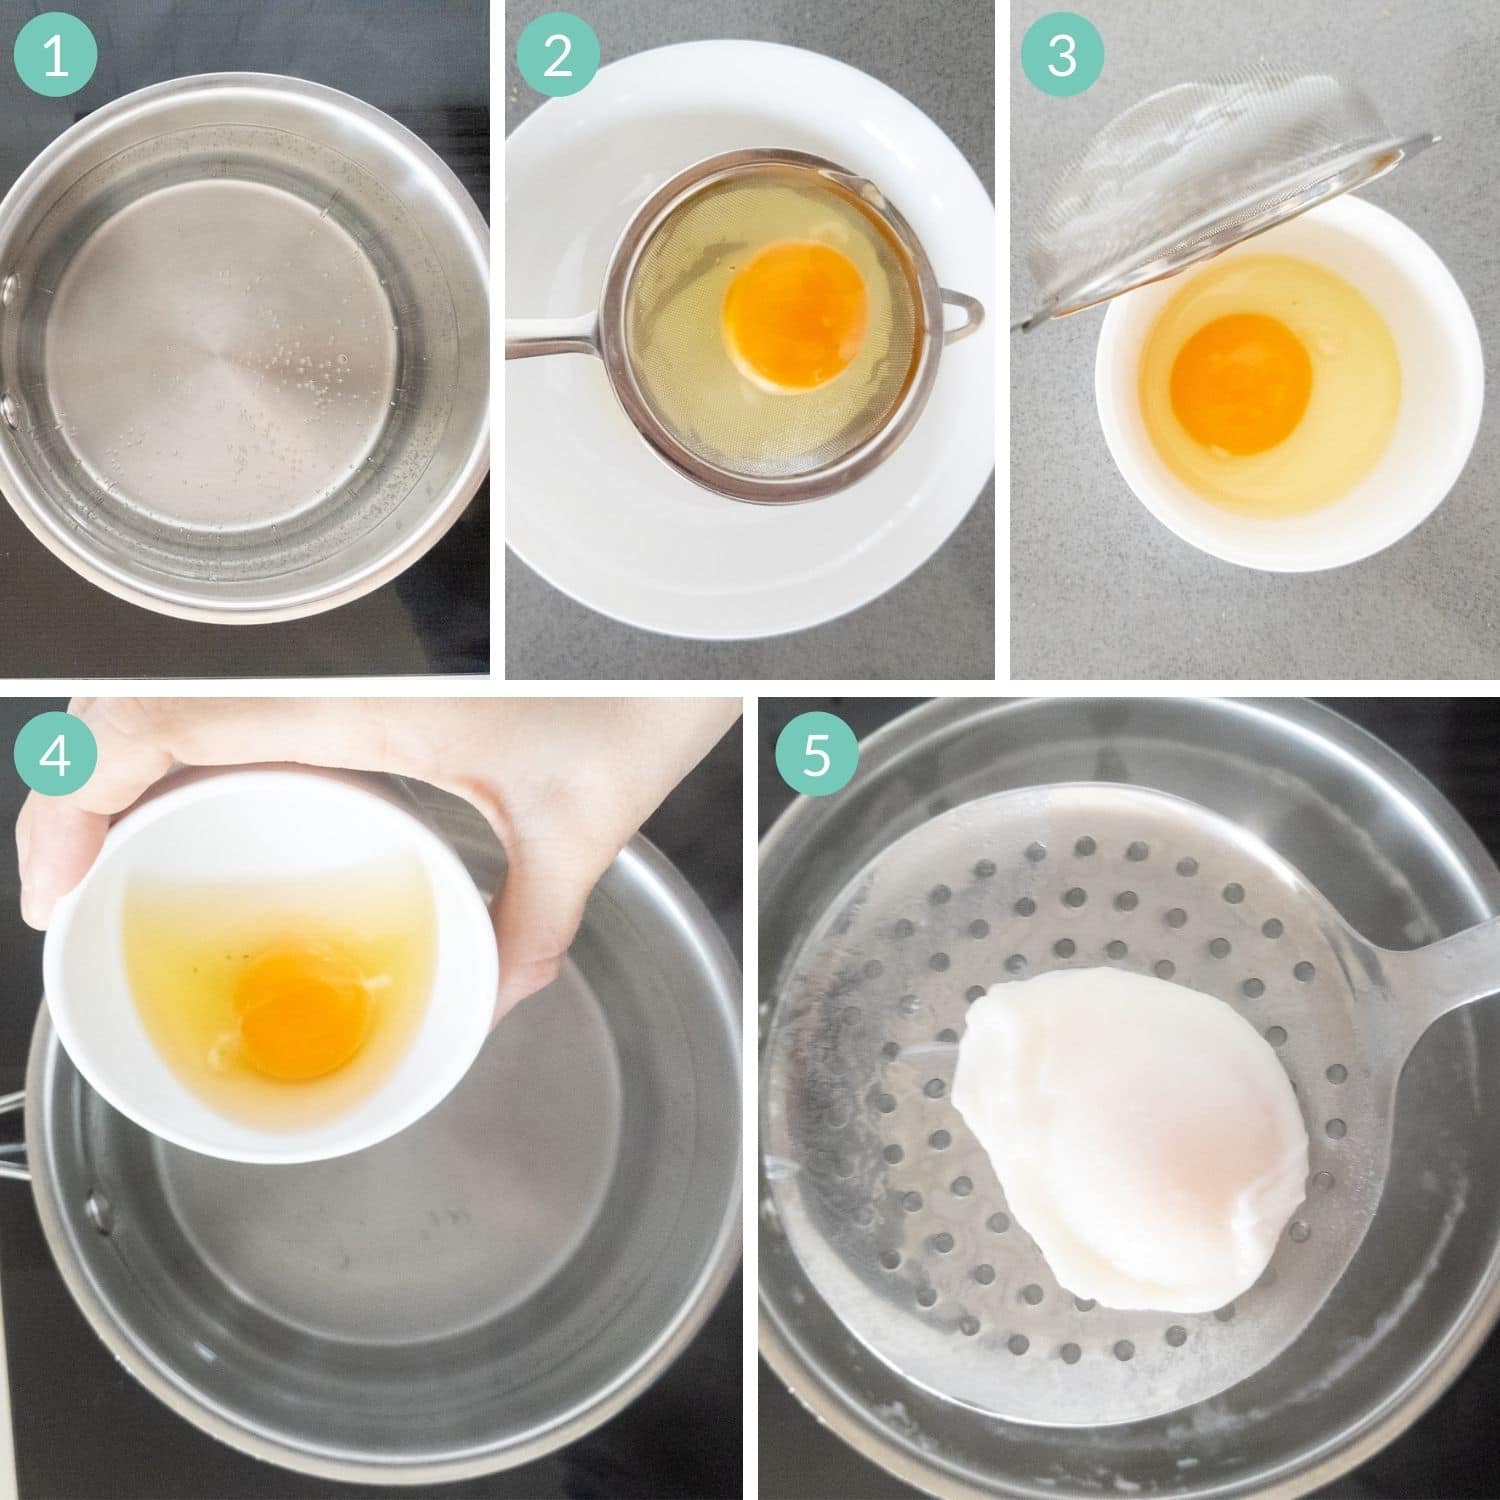 Numbered photo collage showing step-by-step how to make poached eggs.